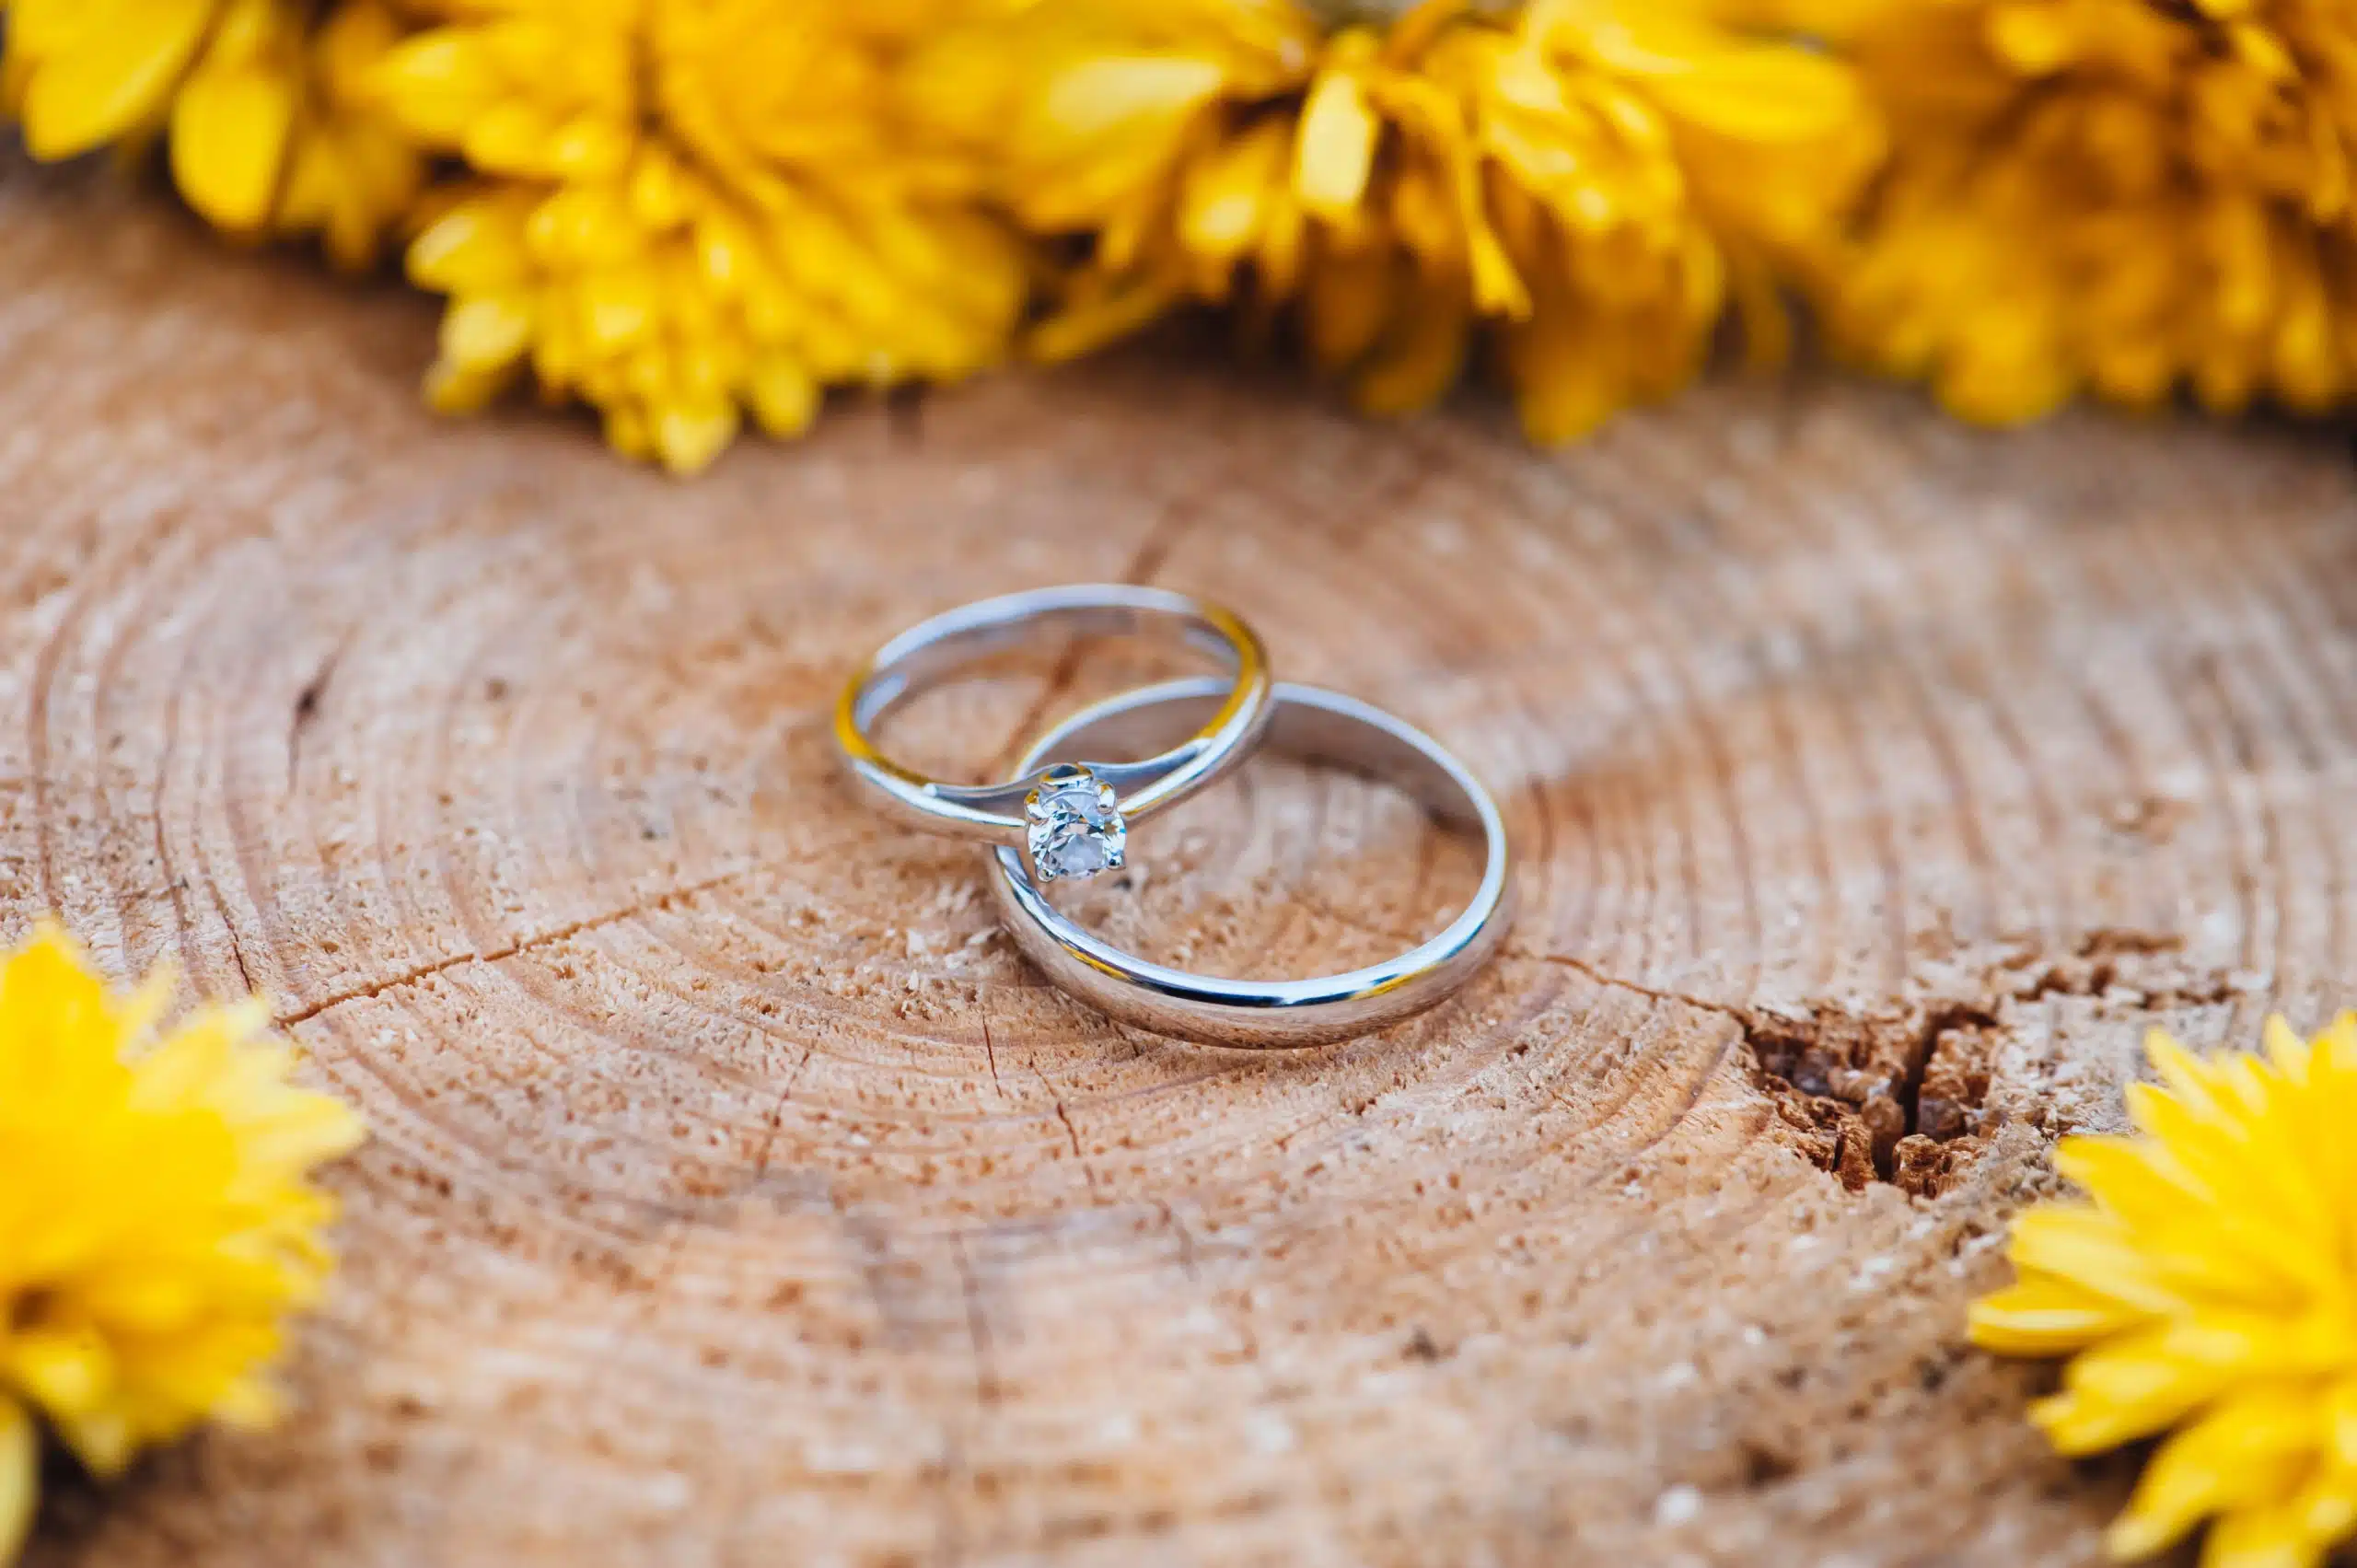 Beautiful two wedding rings, one with a diamond, on a wooden table